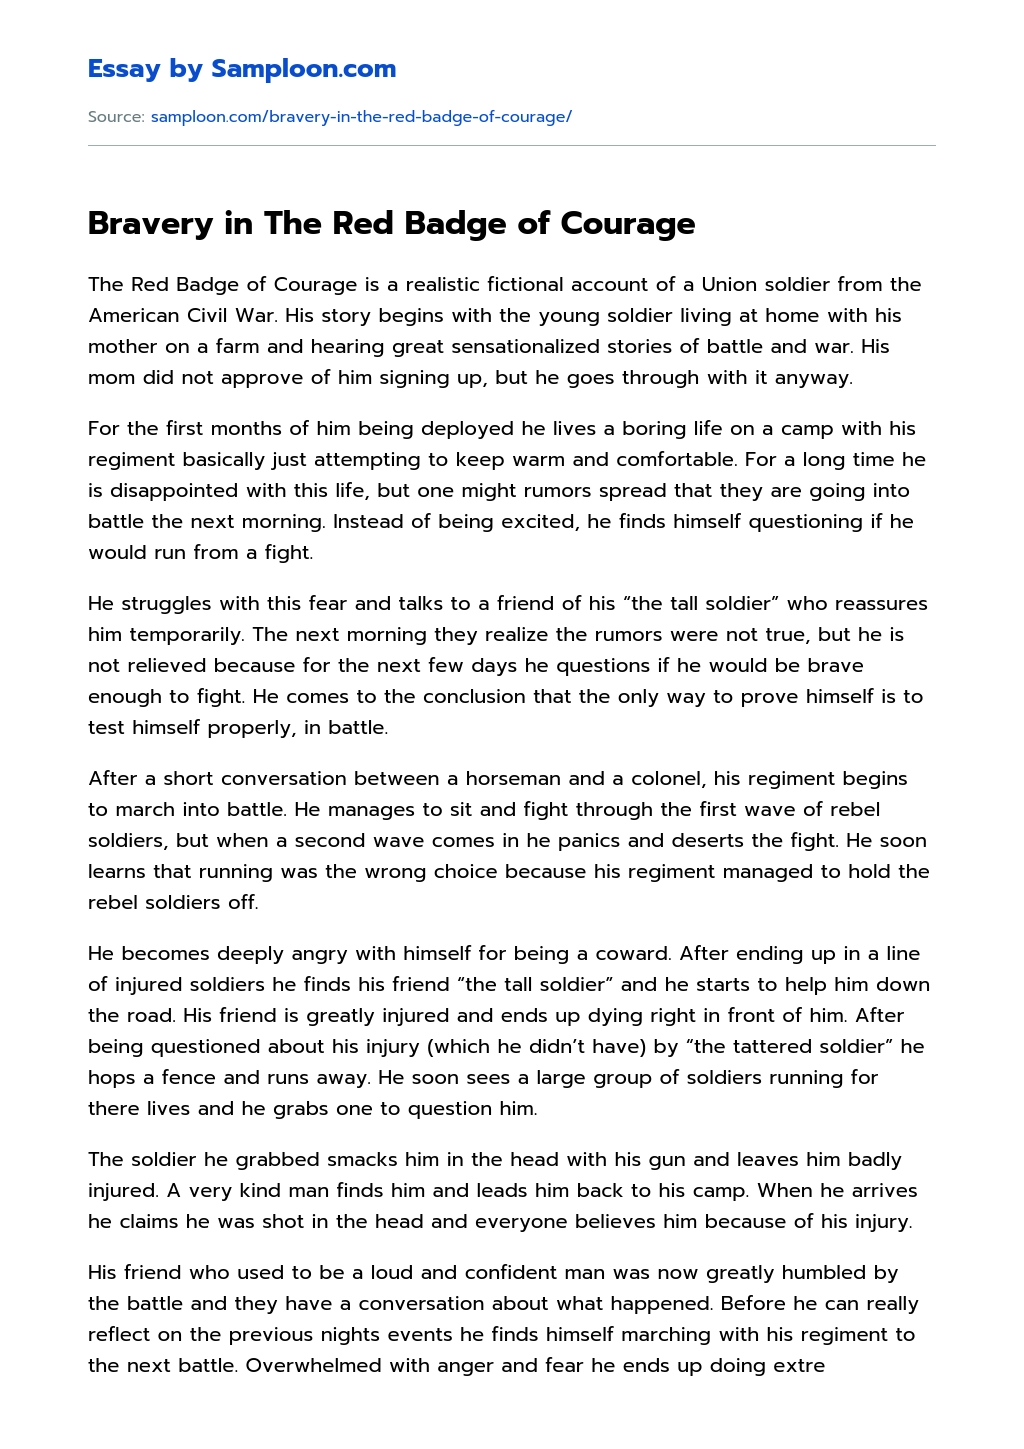 Bravery in The Red Badge of Courage essay